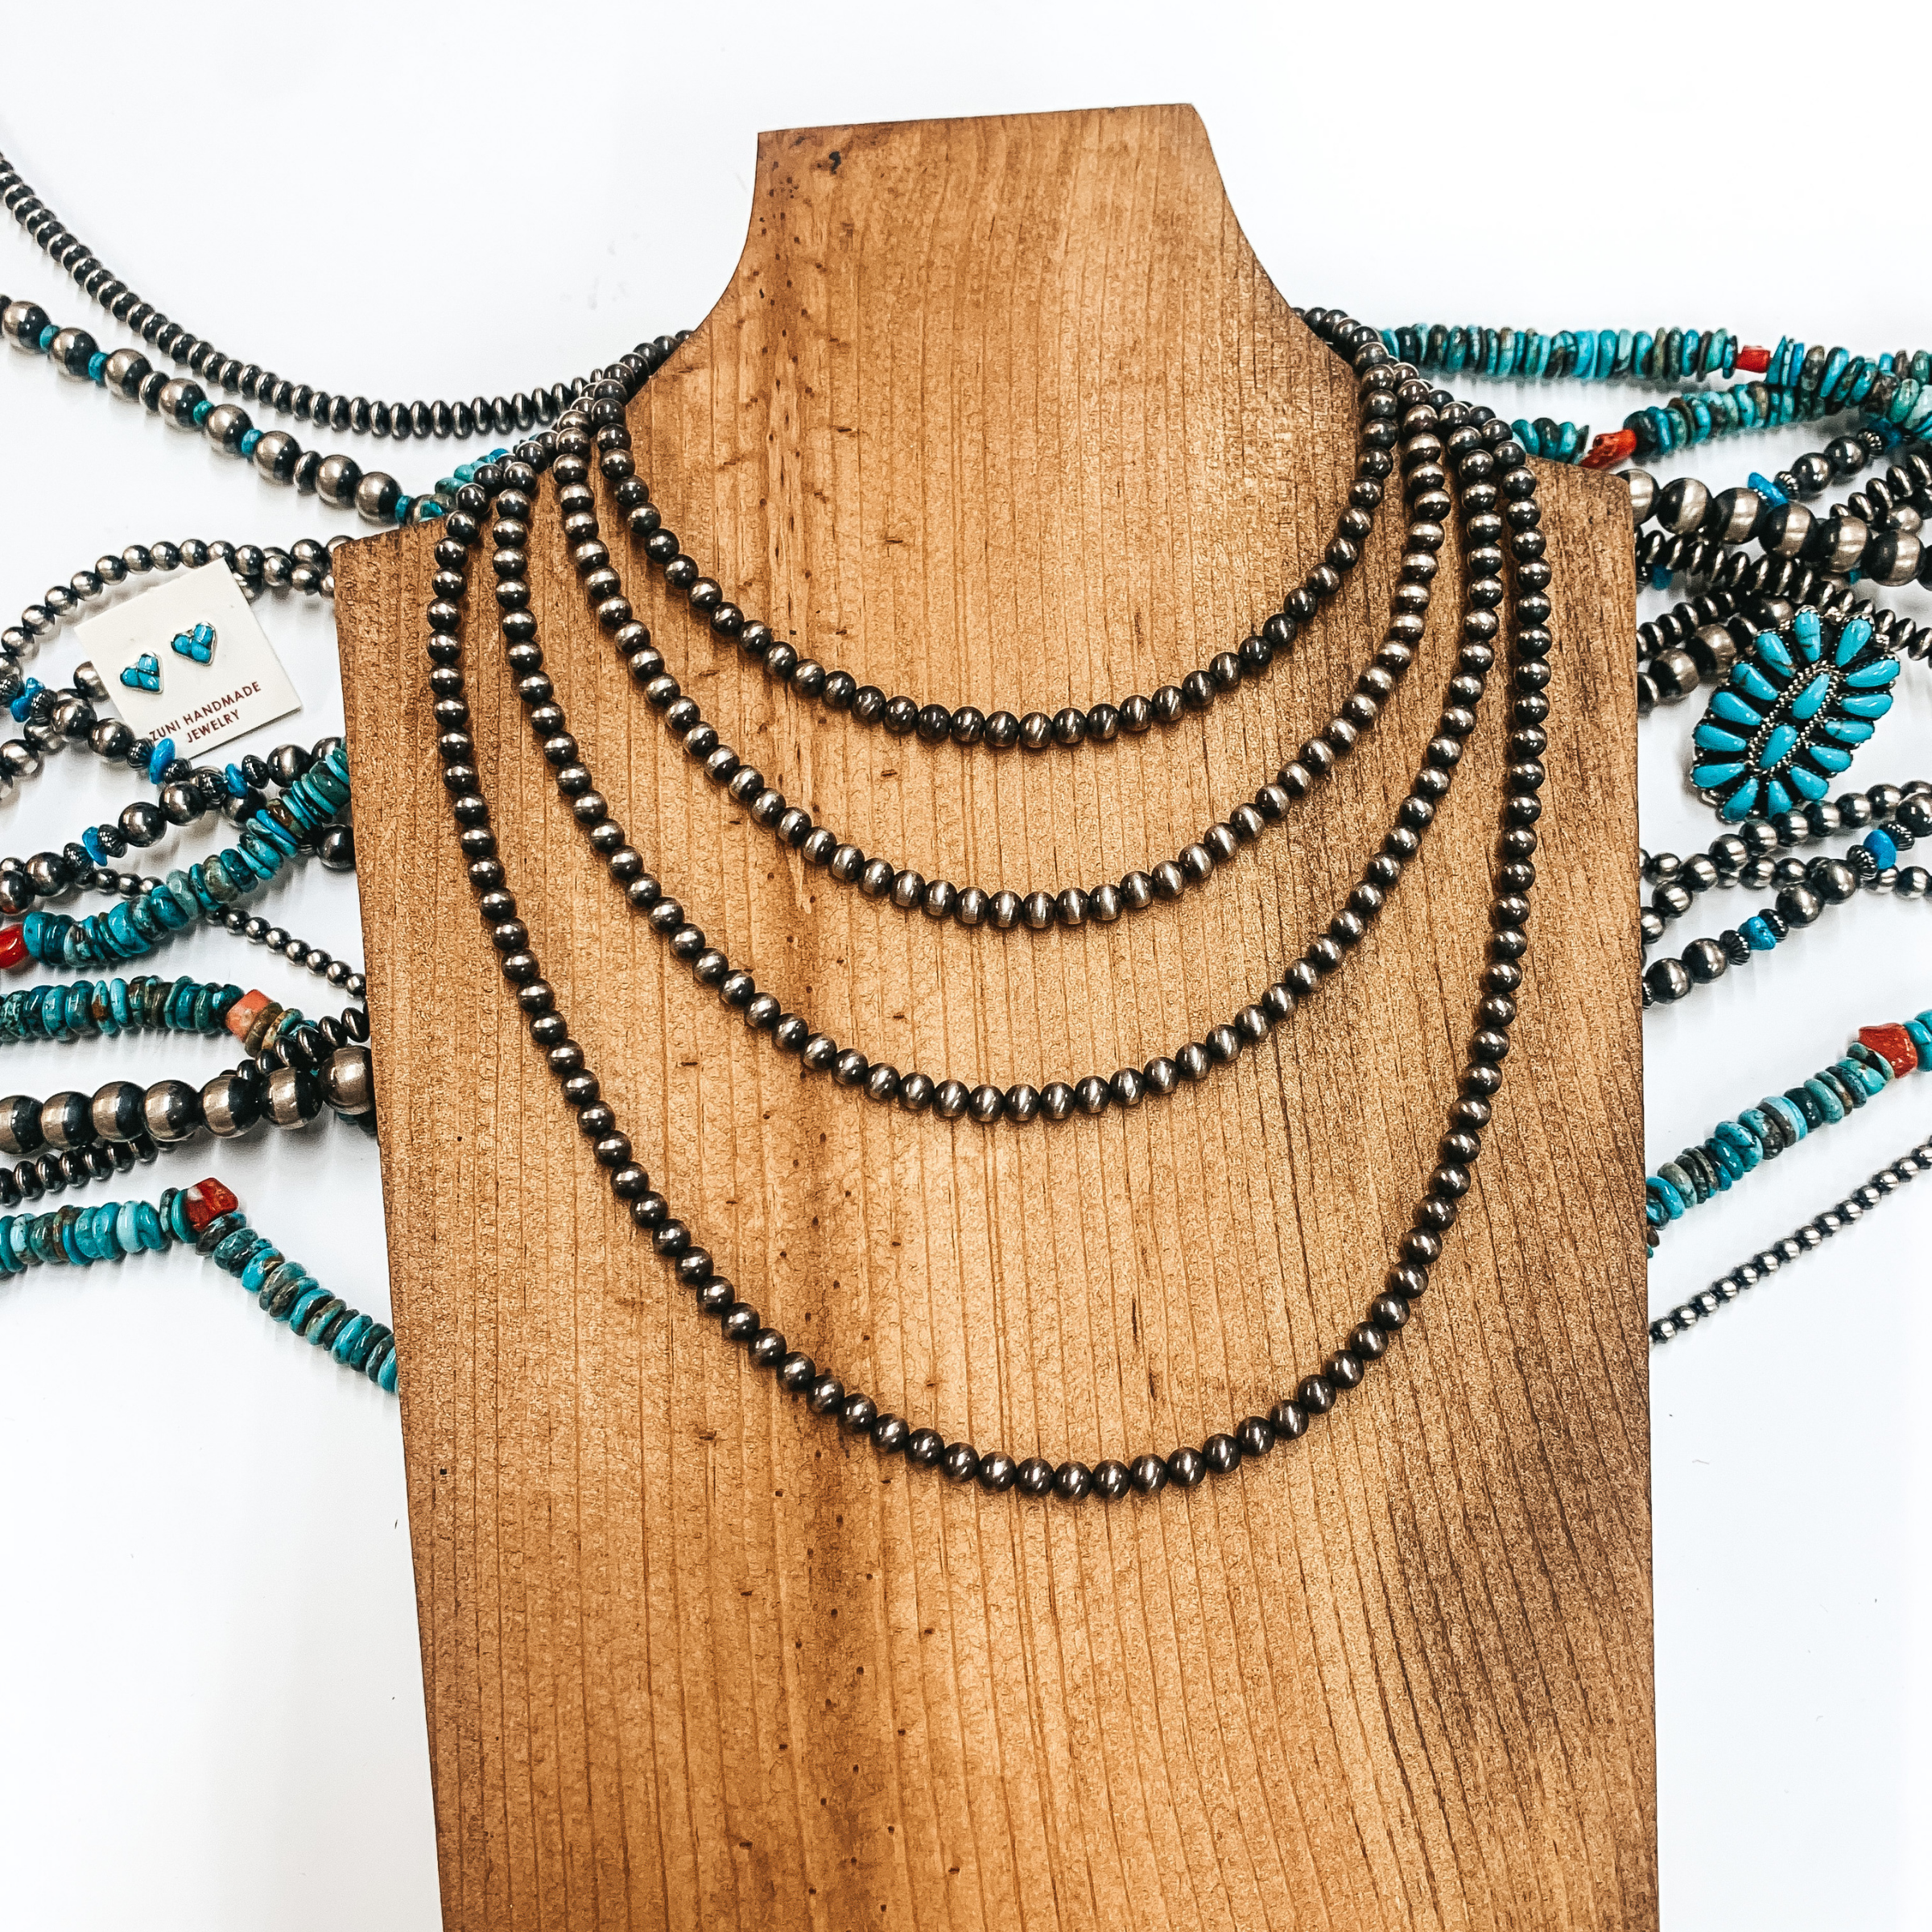 Navajo | Navajo Handmade 5mm Navajo Pearls Necklace | Varying Lengths - Giddy Up Glamour Boutique